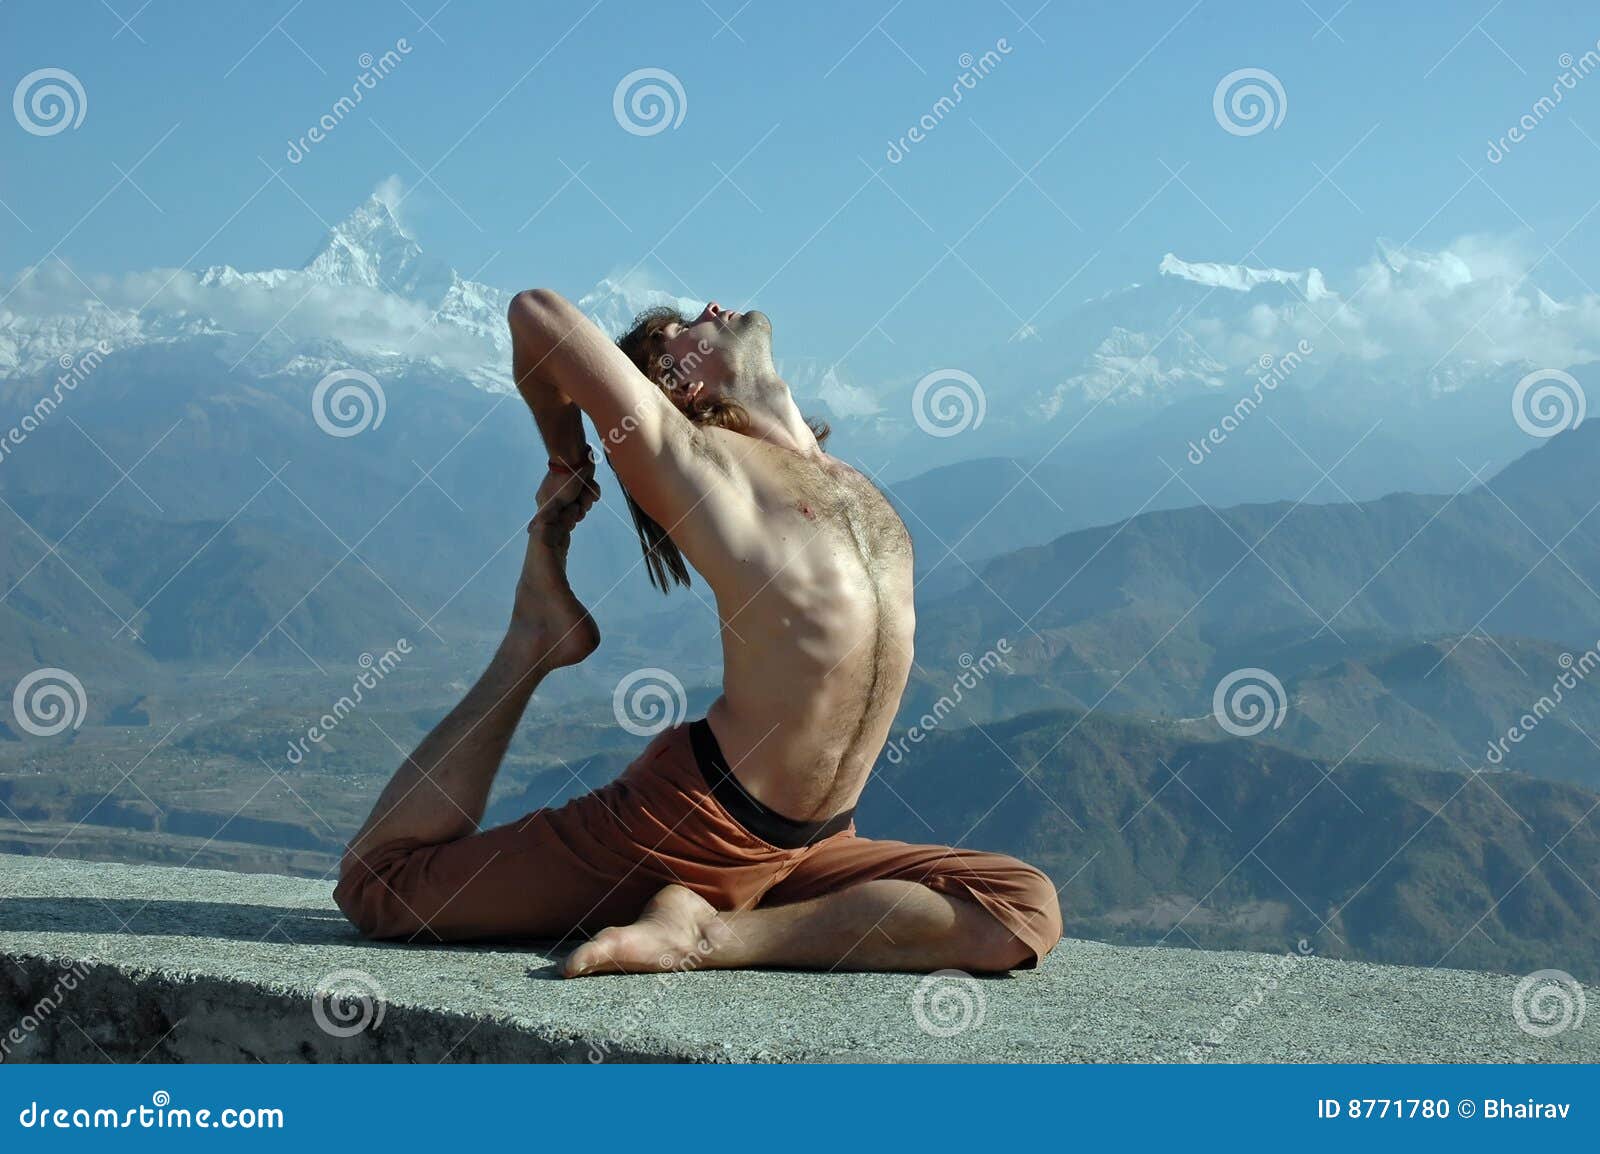 Yoga in Himalayas stock photo. Image of action, healthy - 8771780